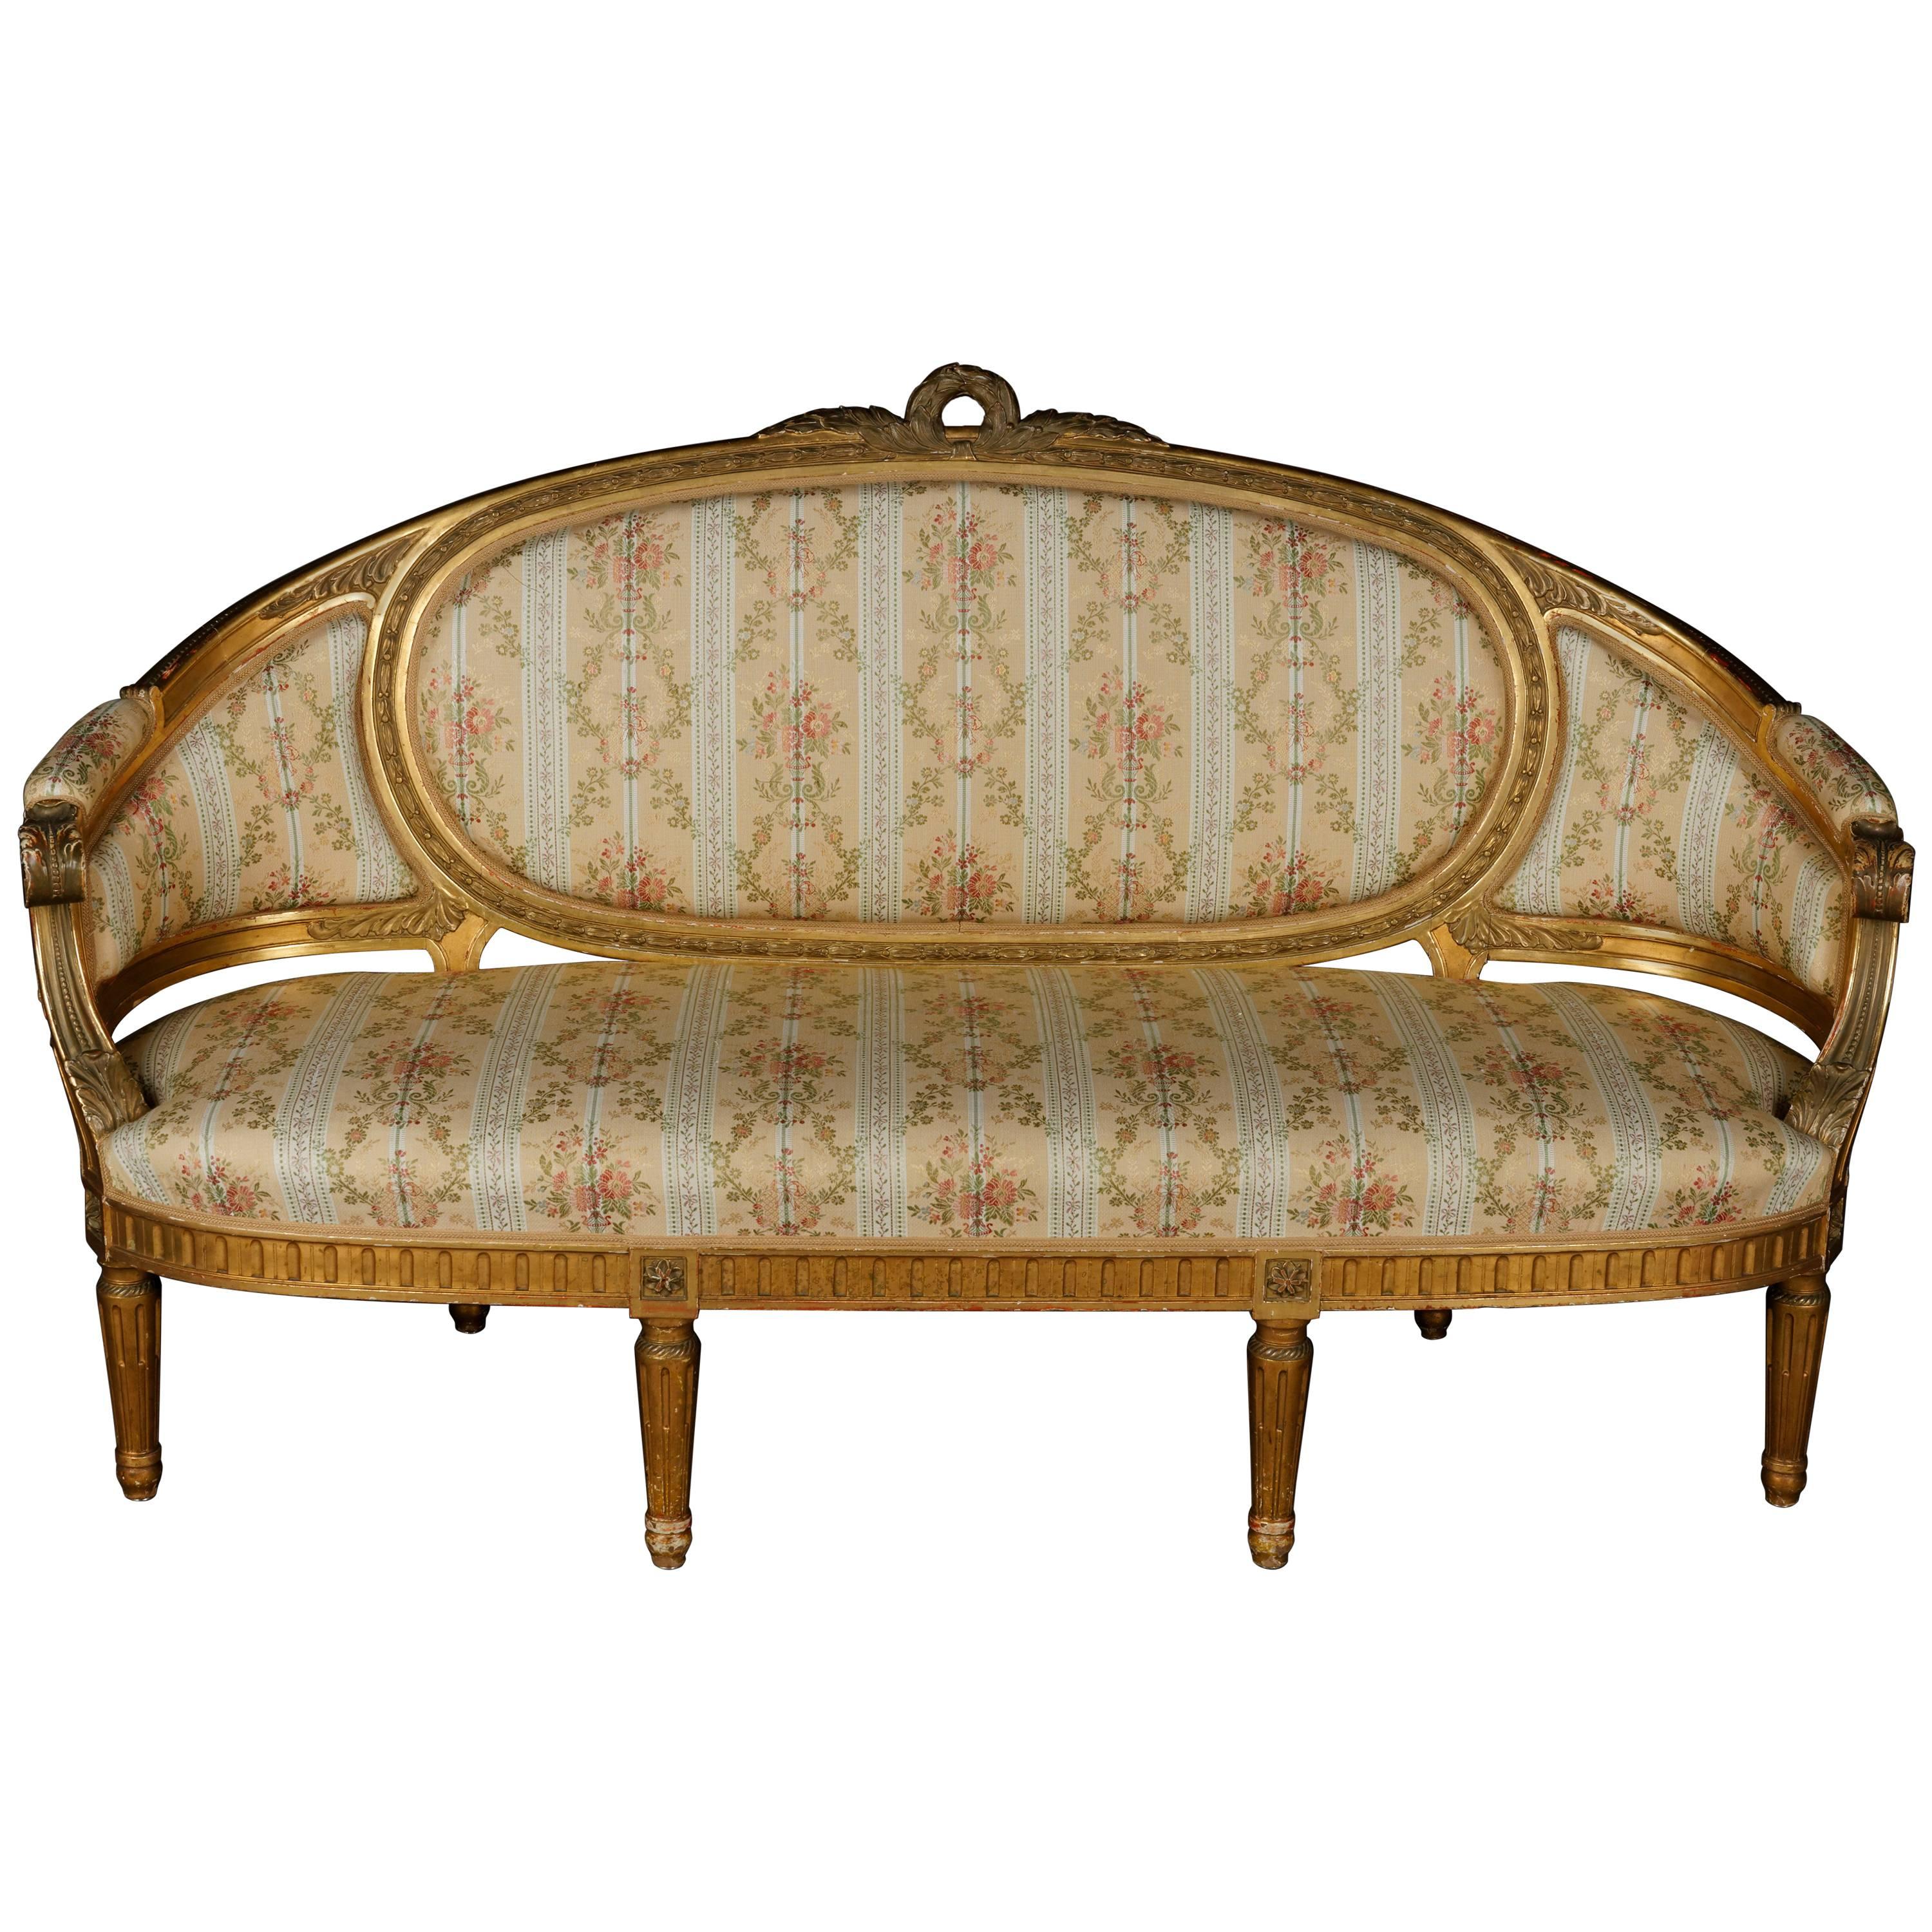 19th Century Sofa in Louis XVI Style, Solid Beechwood Poliment Gilded